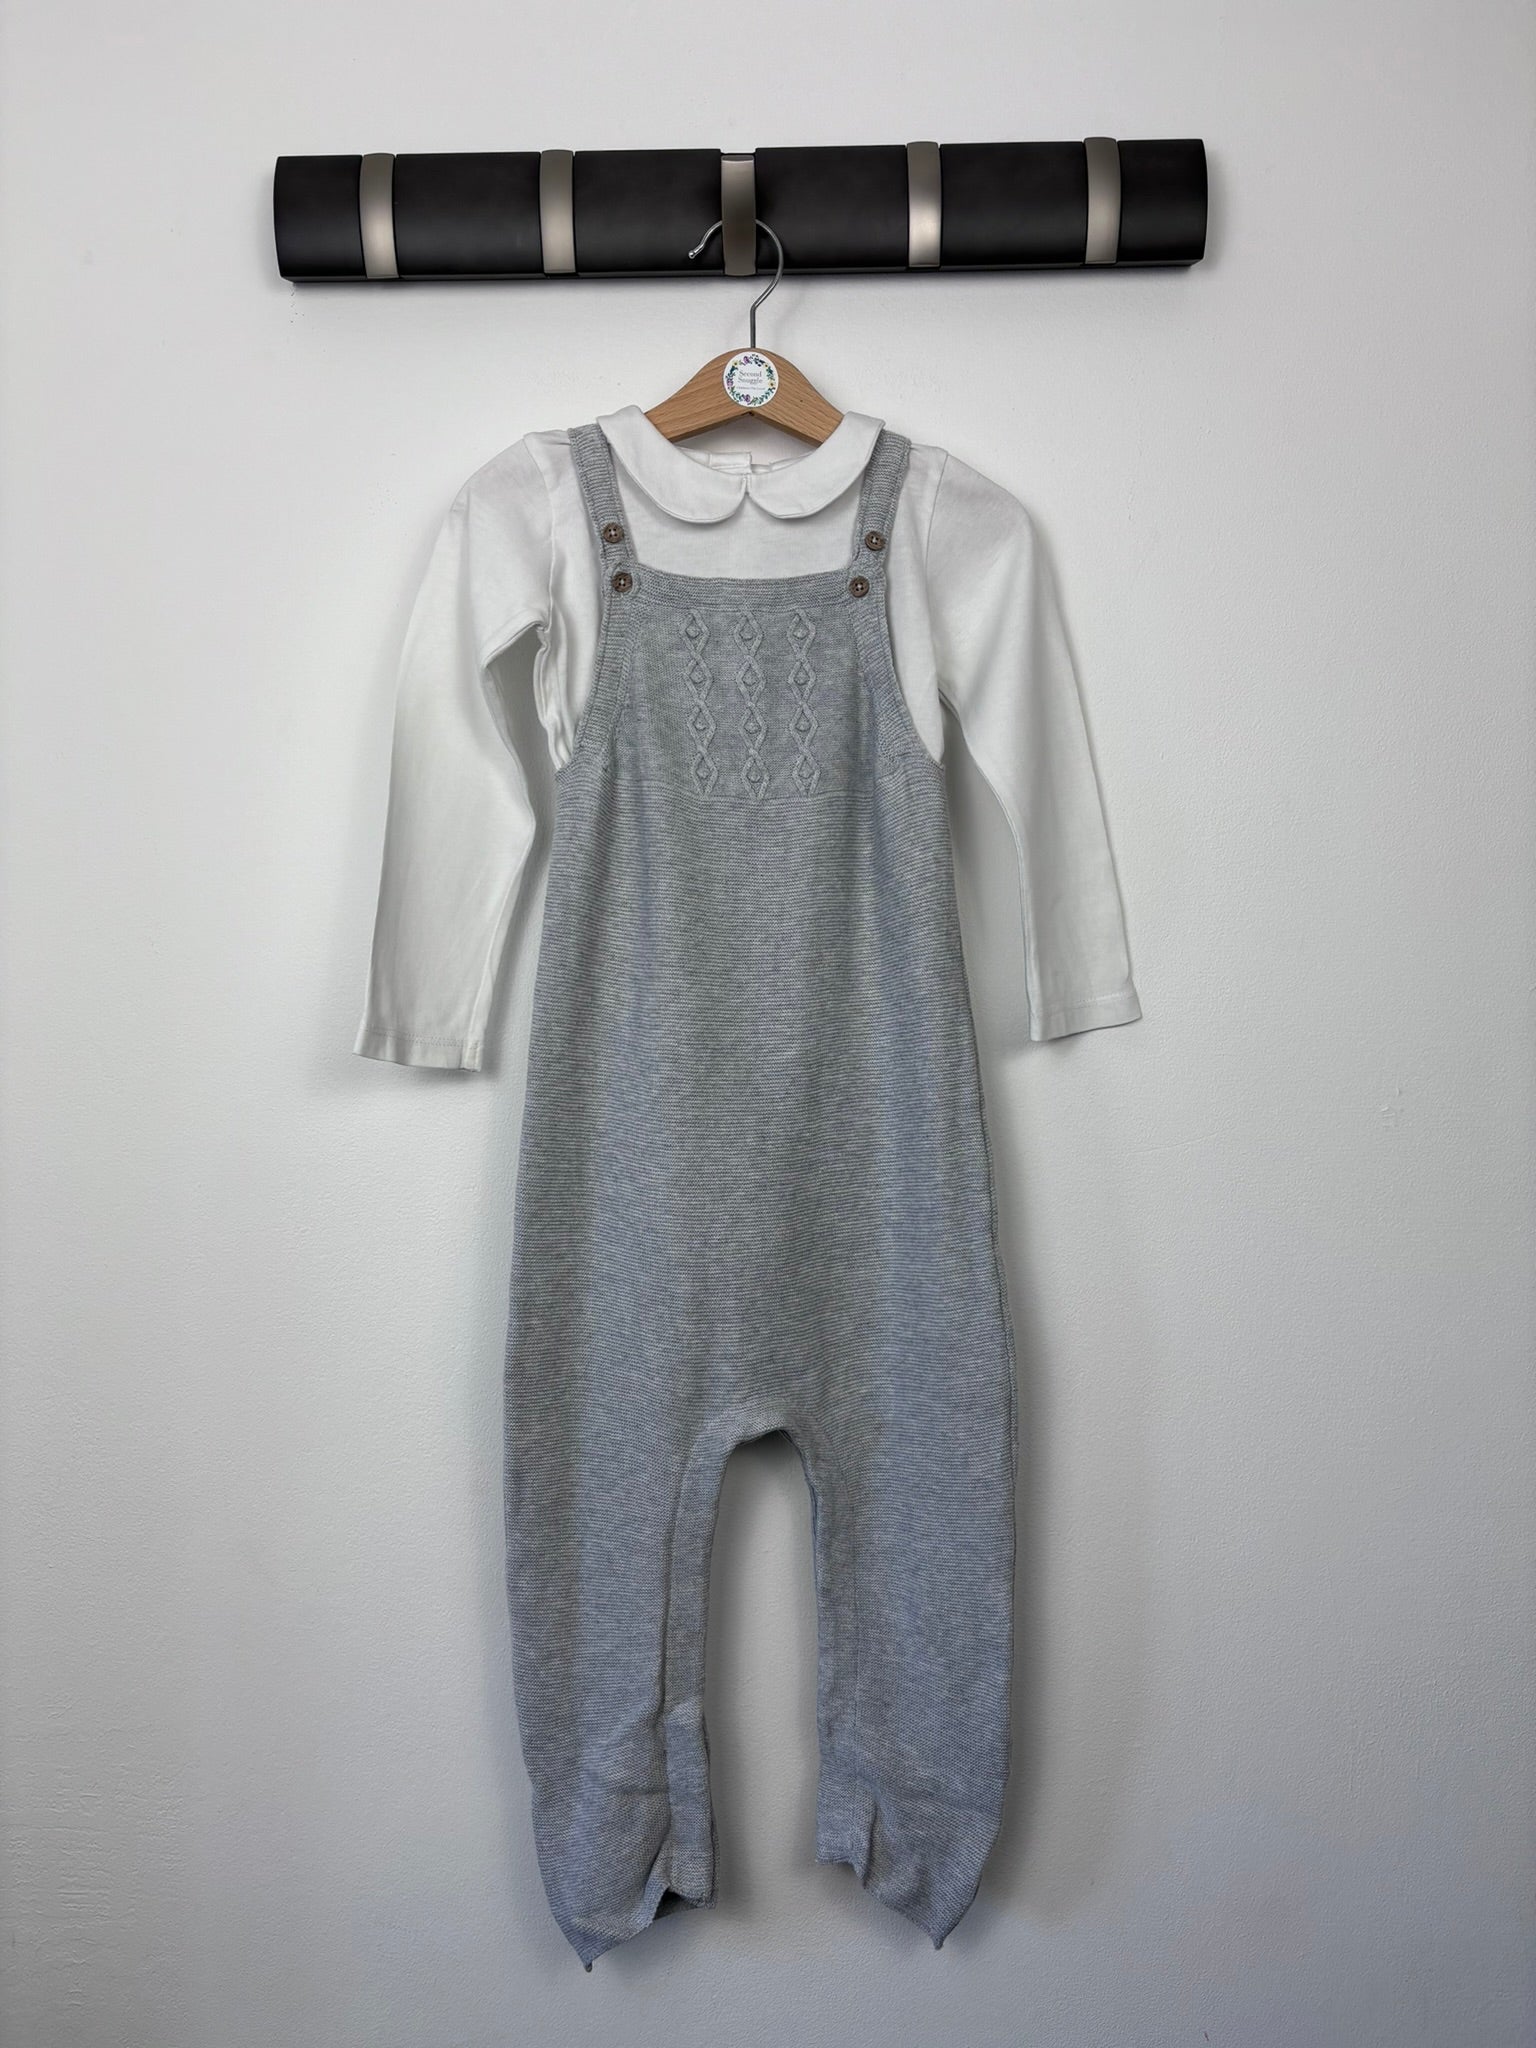 Tu 18-24 Months-Dungarees-Second Snuggle Preloved